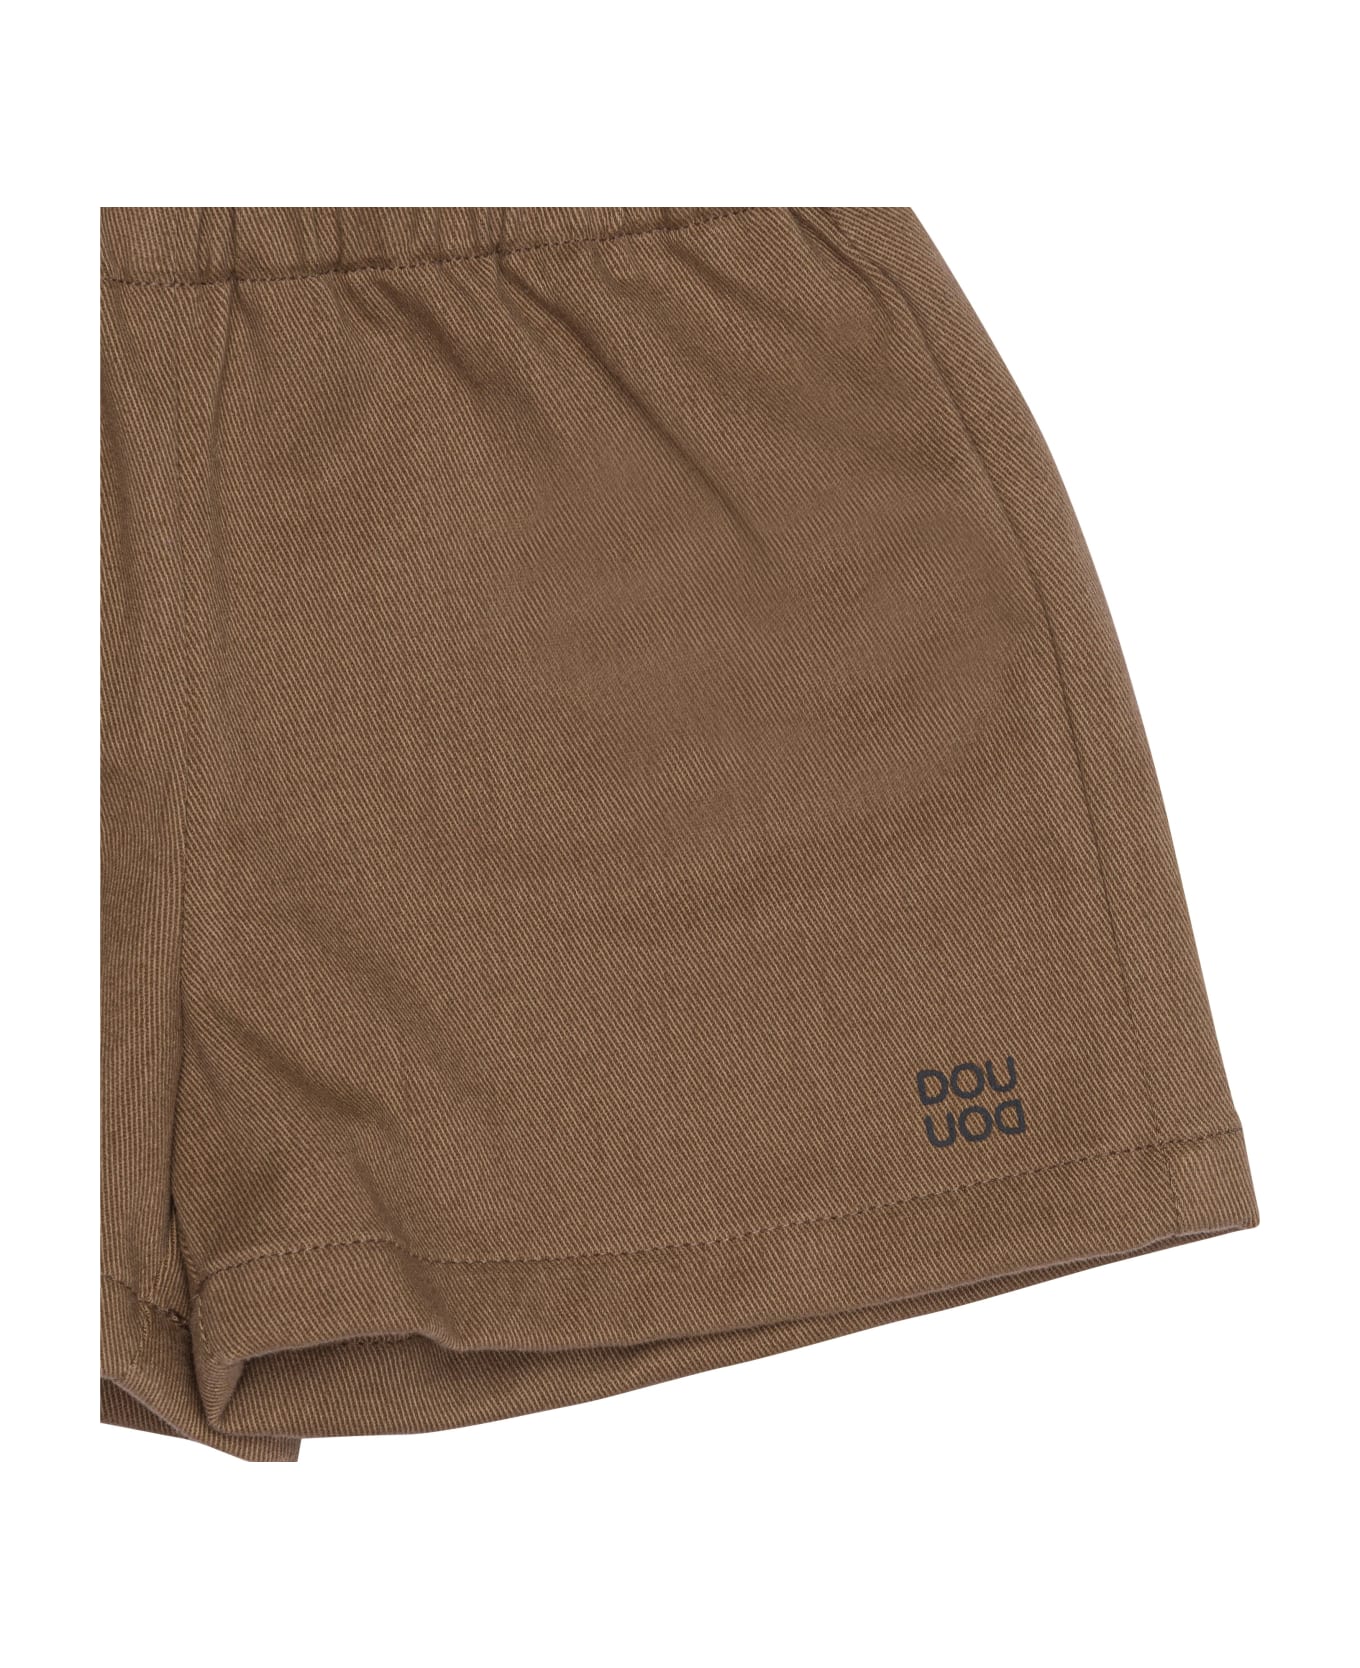 Douuod Shorts With Print - Brown ボトムス